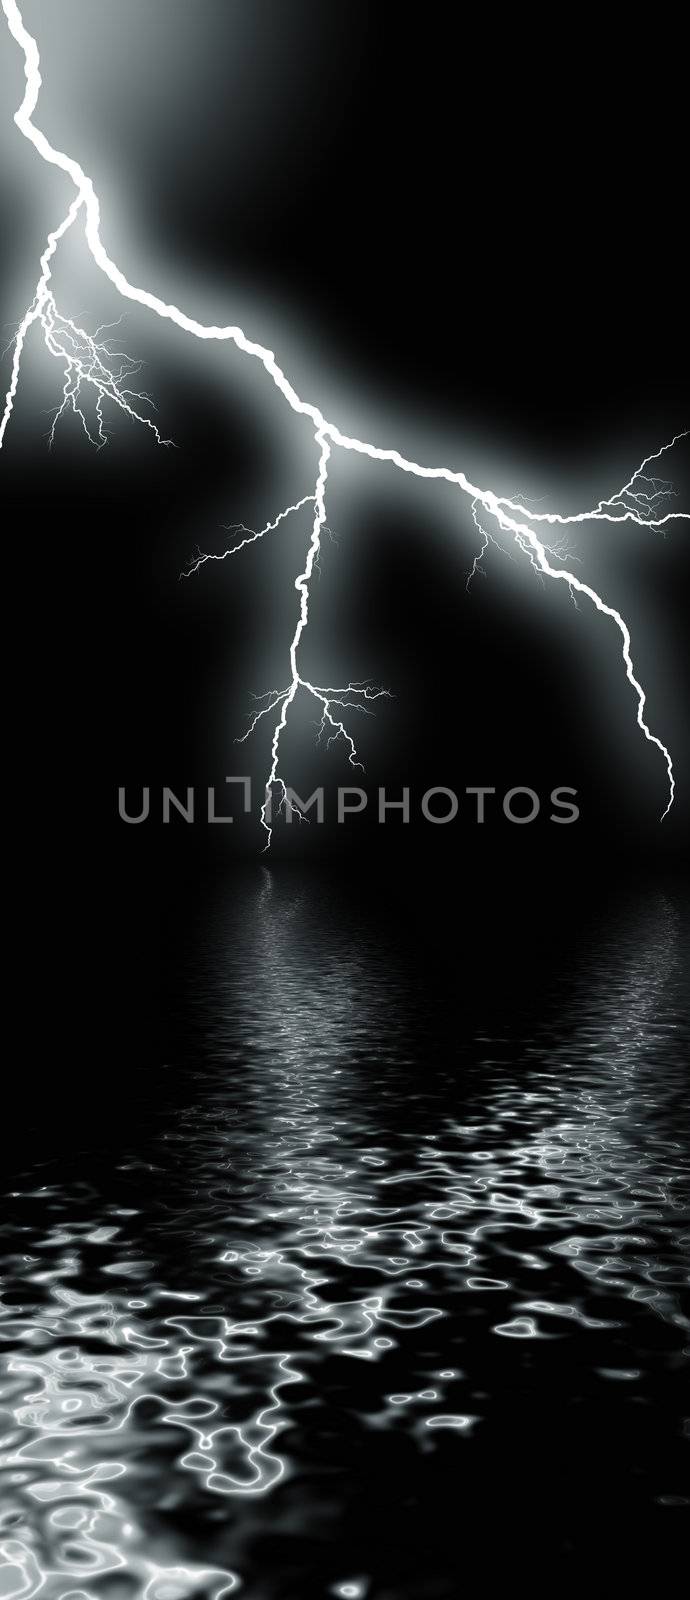  flash of lightning against night sky over water